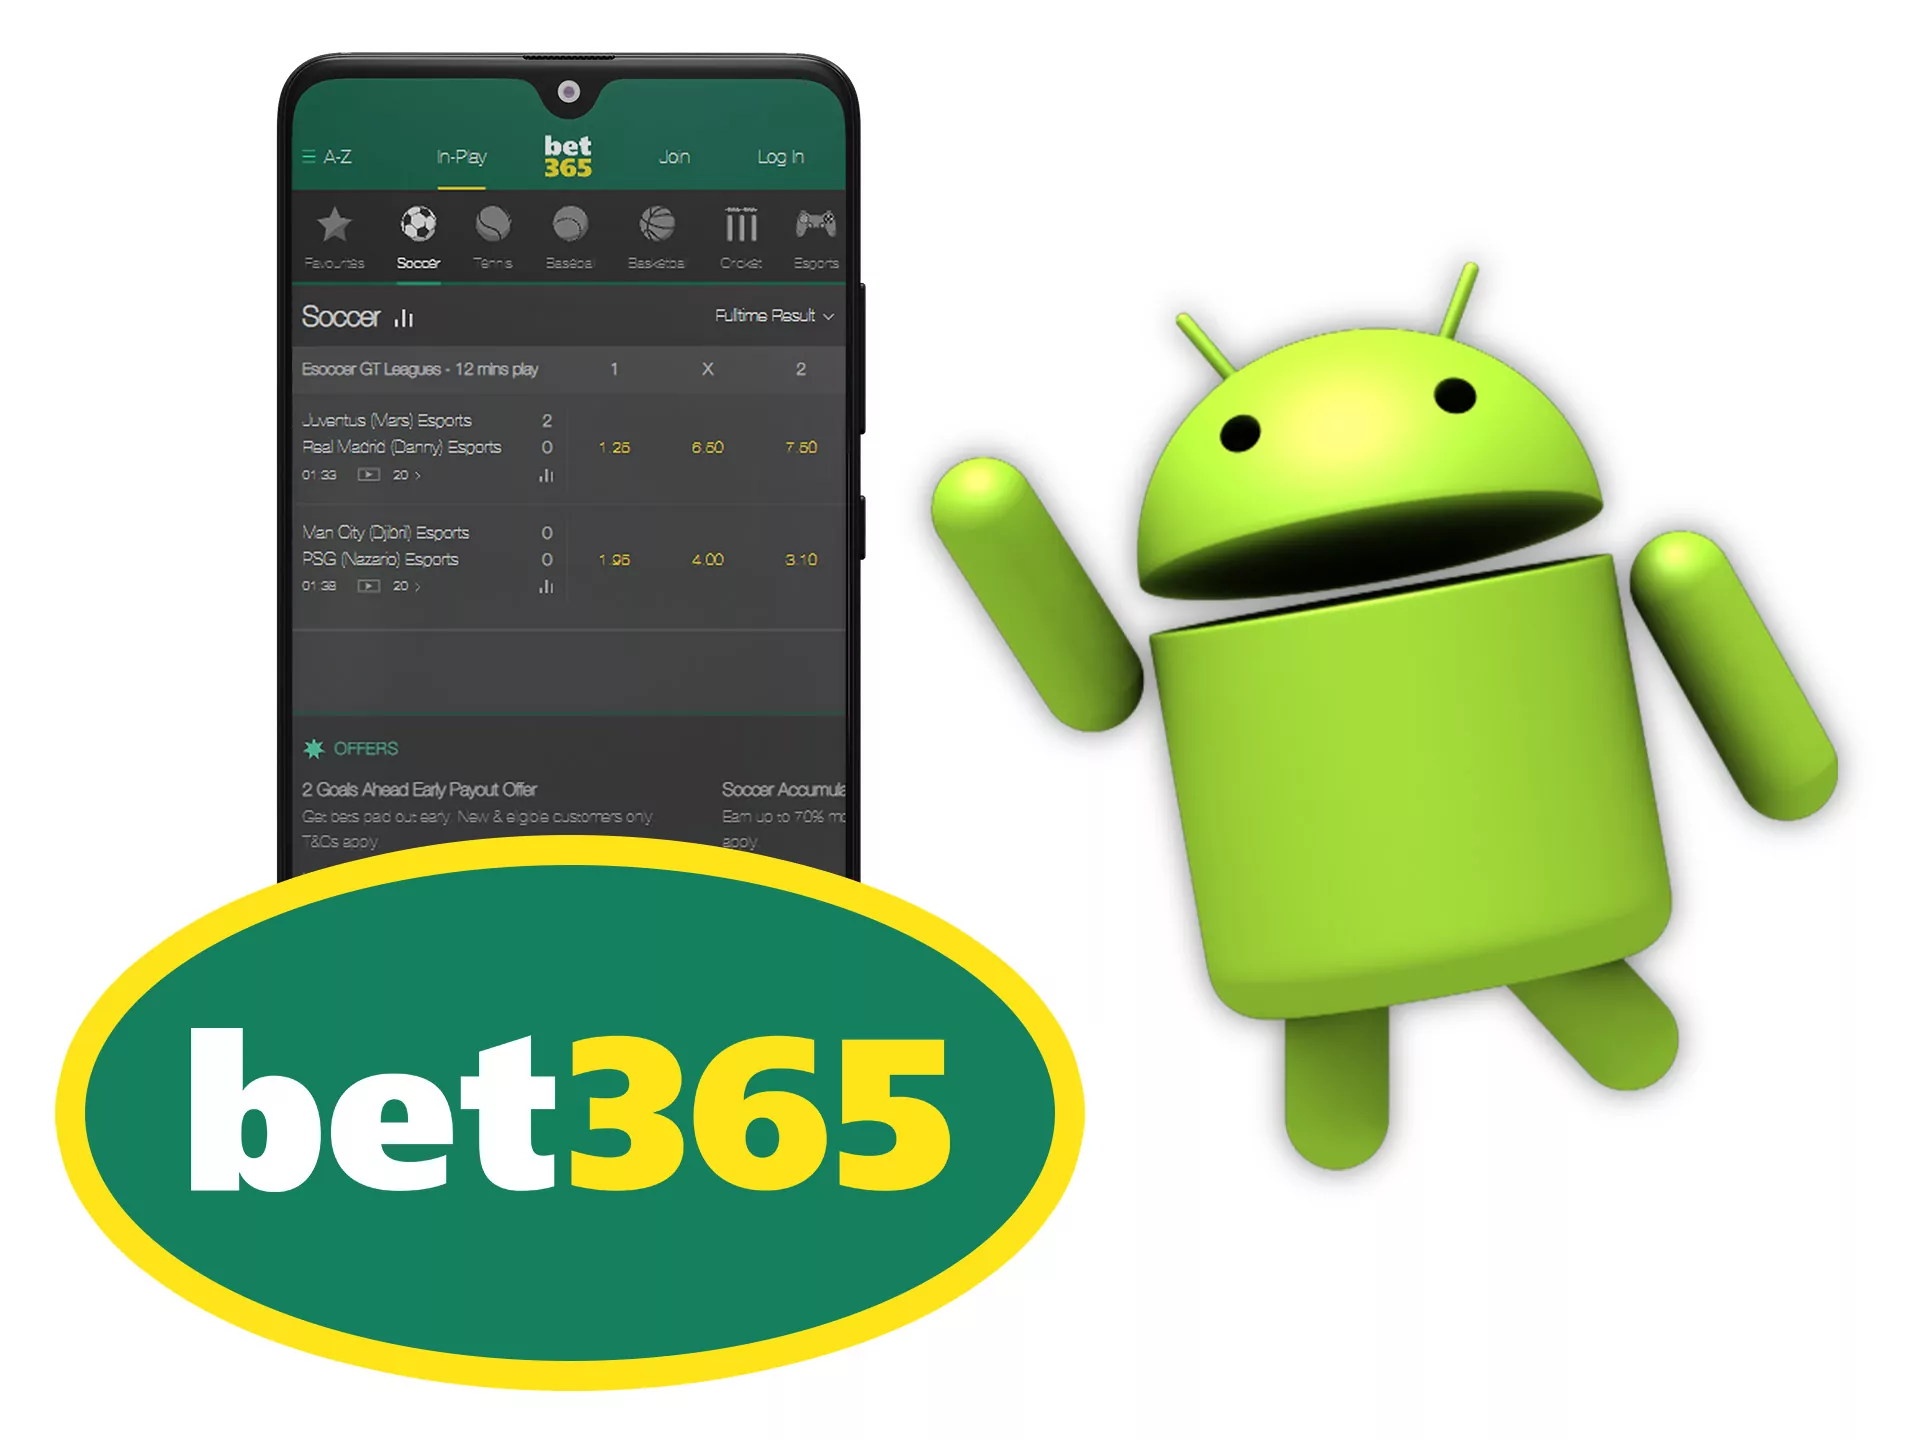 You can install Bet365 app on any android device.